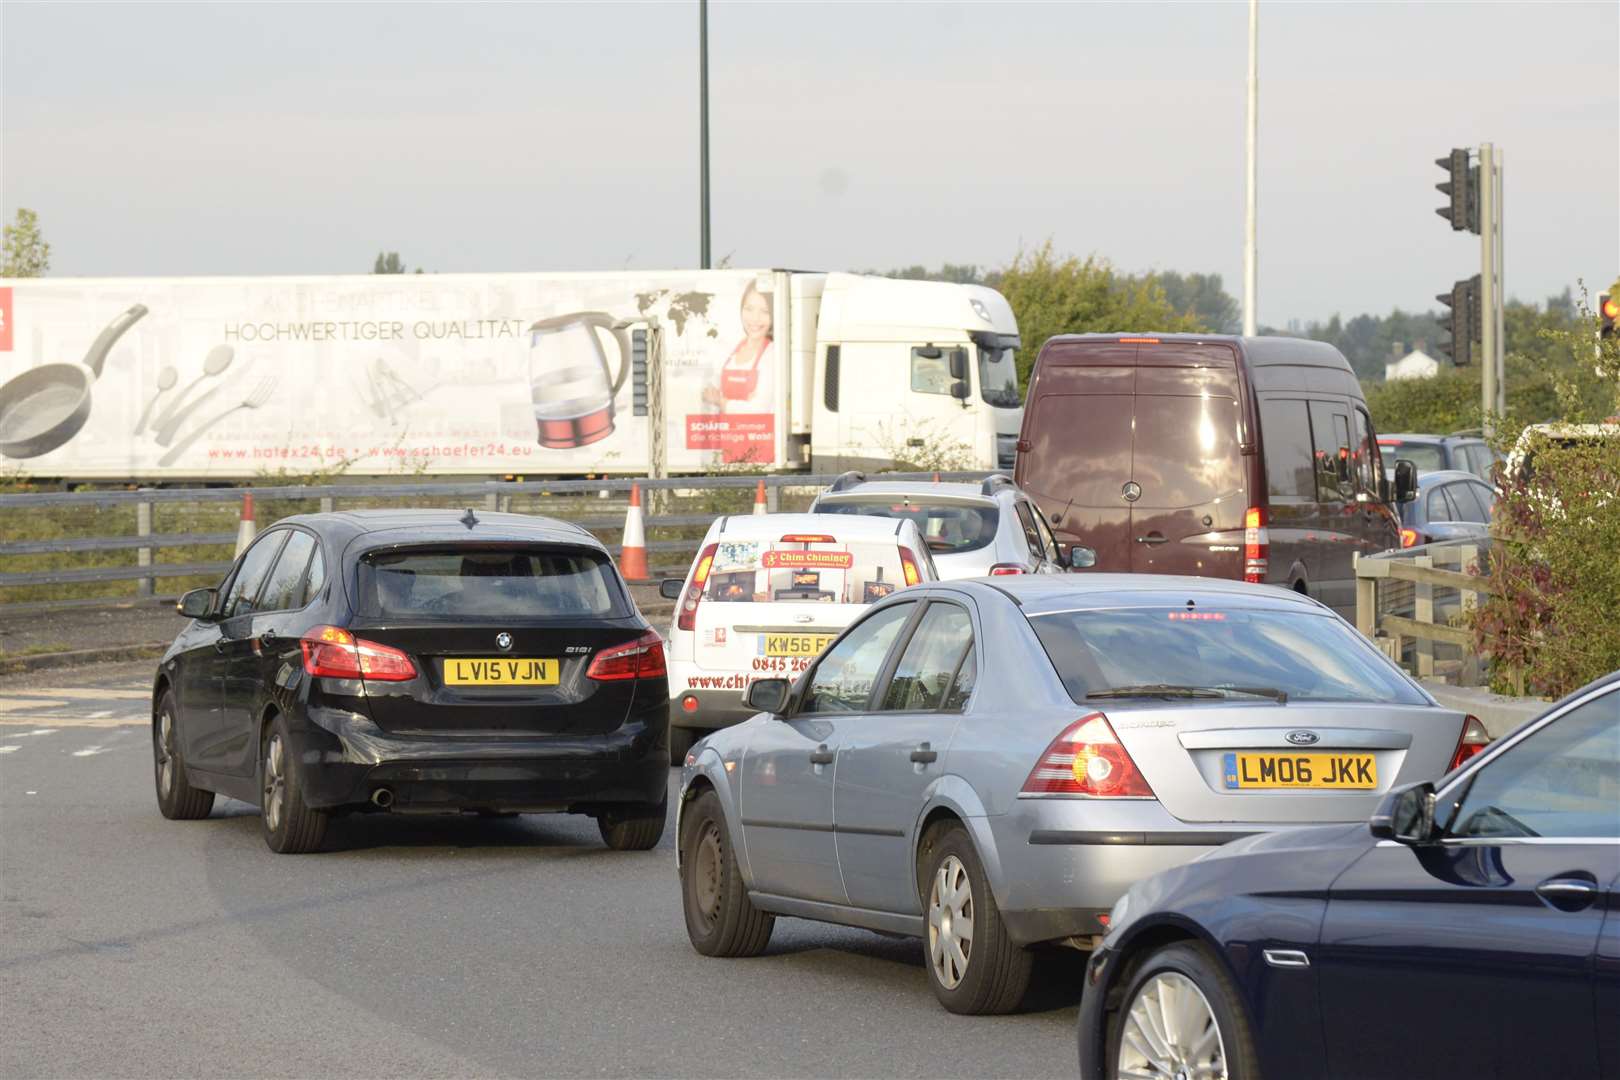 It is one of Kent's most congested junctions